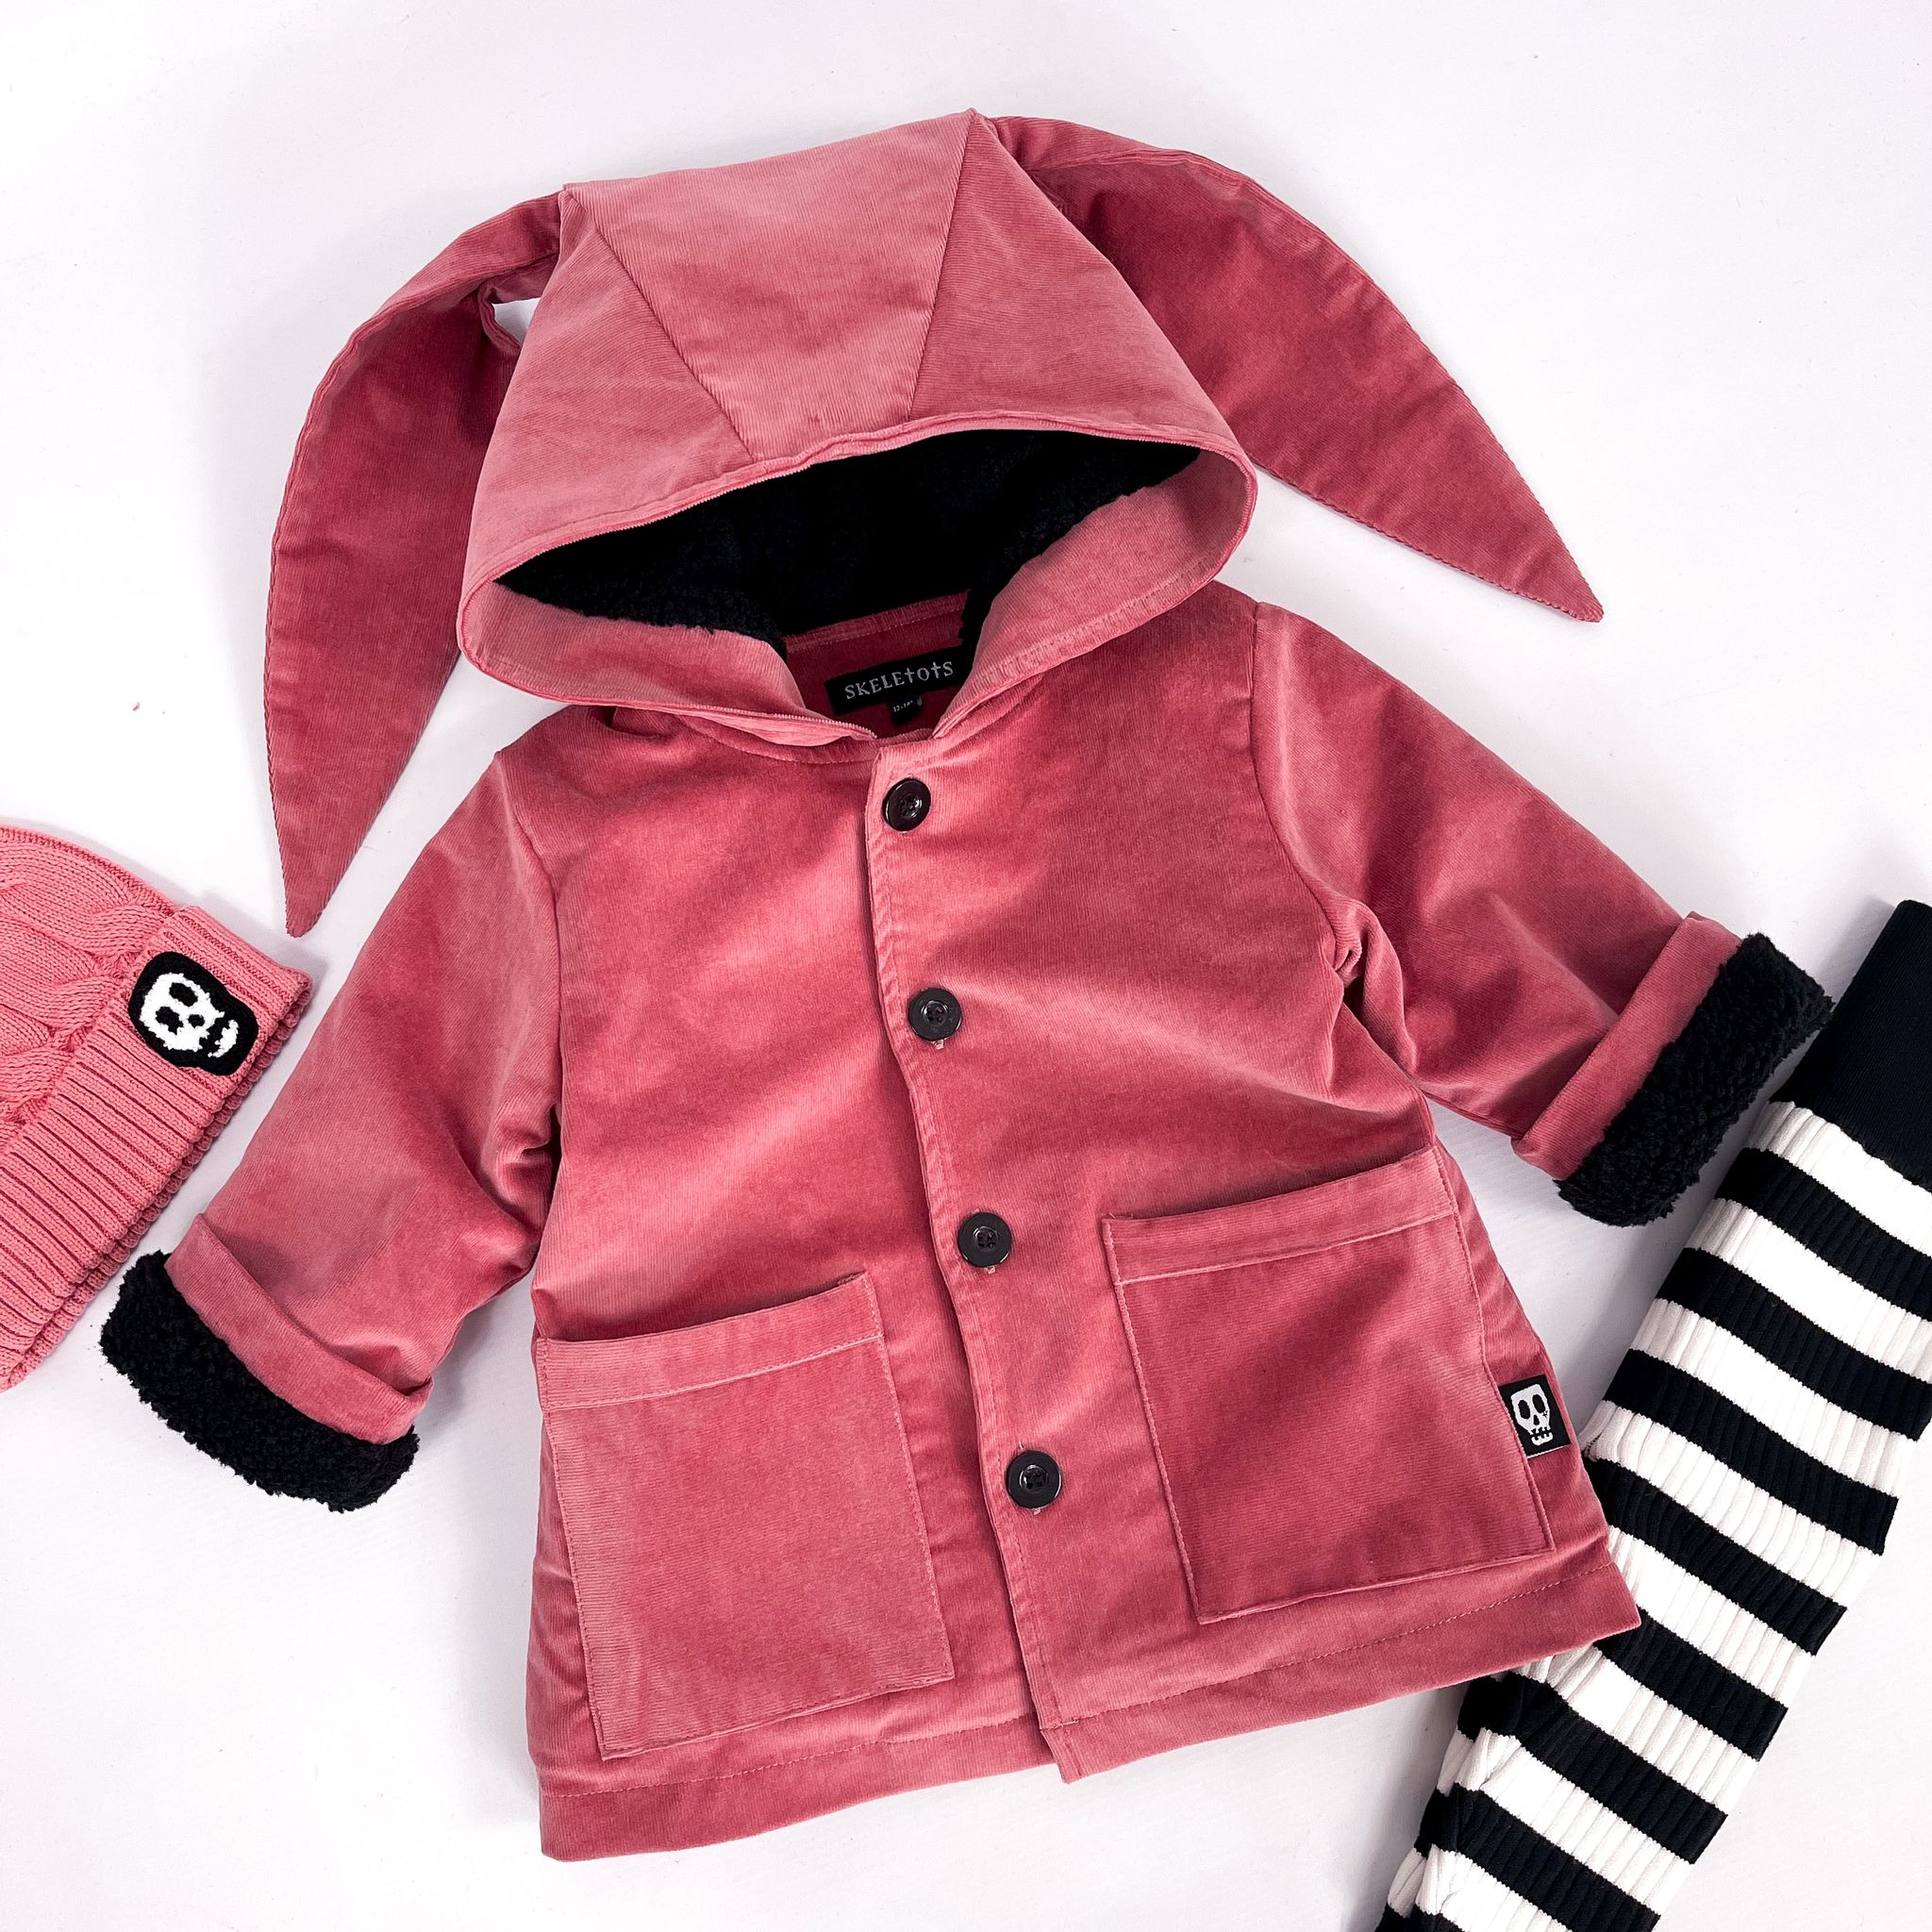 Kids Cord Coat with Bunny Ears - Dusky Rose Pink